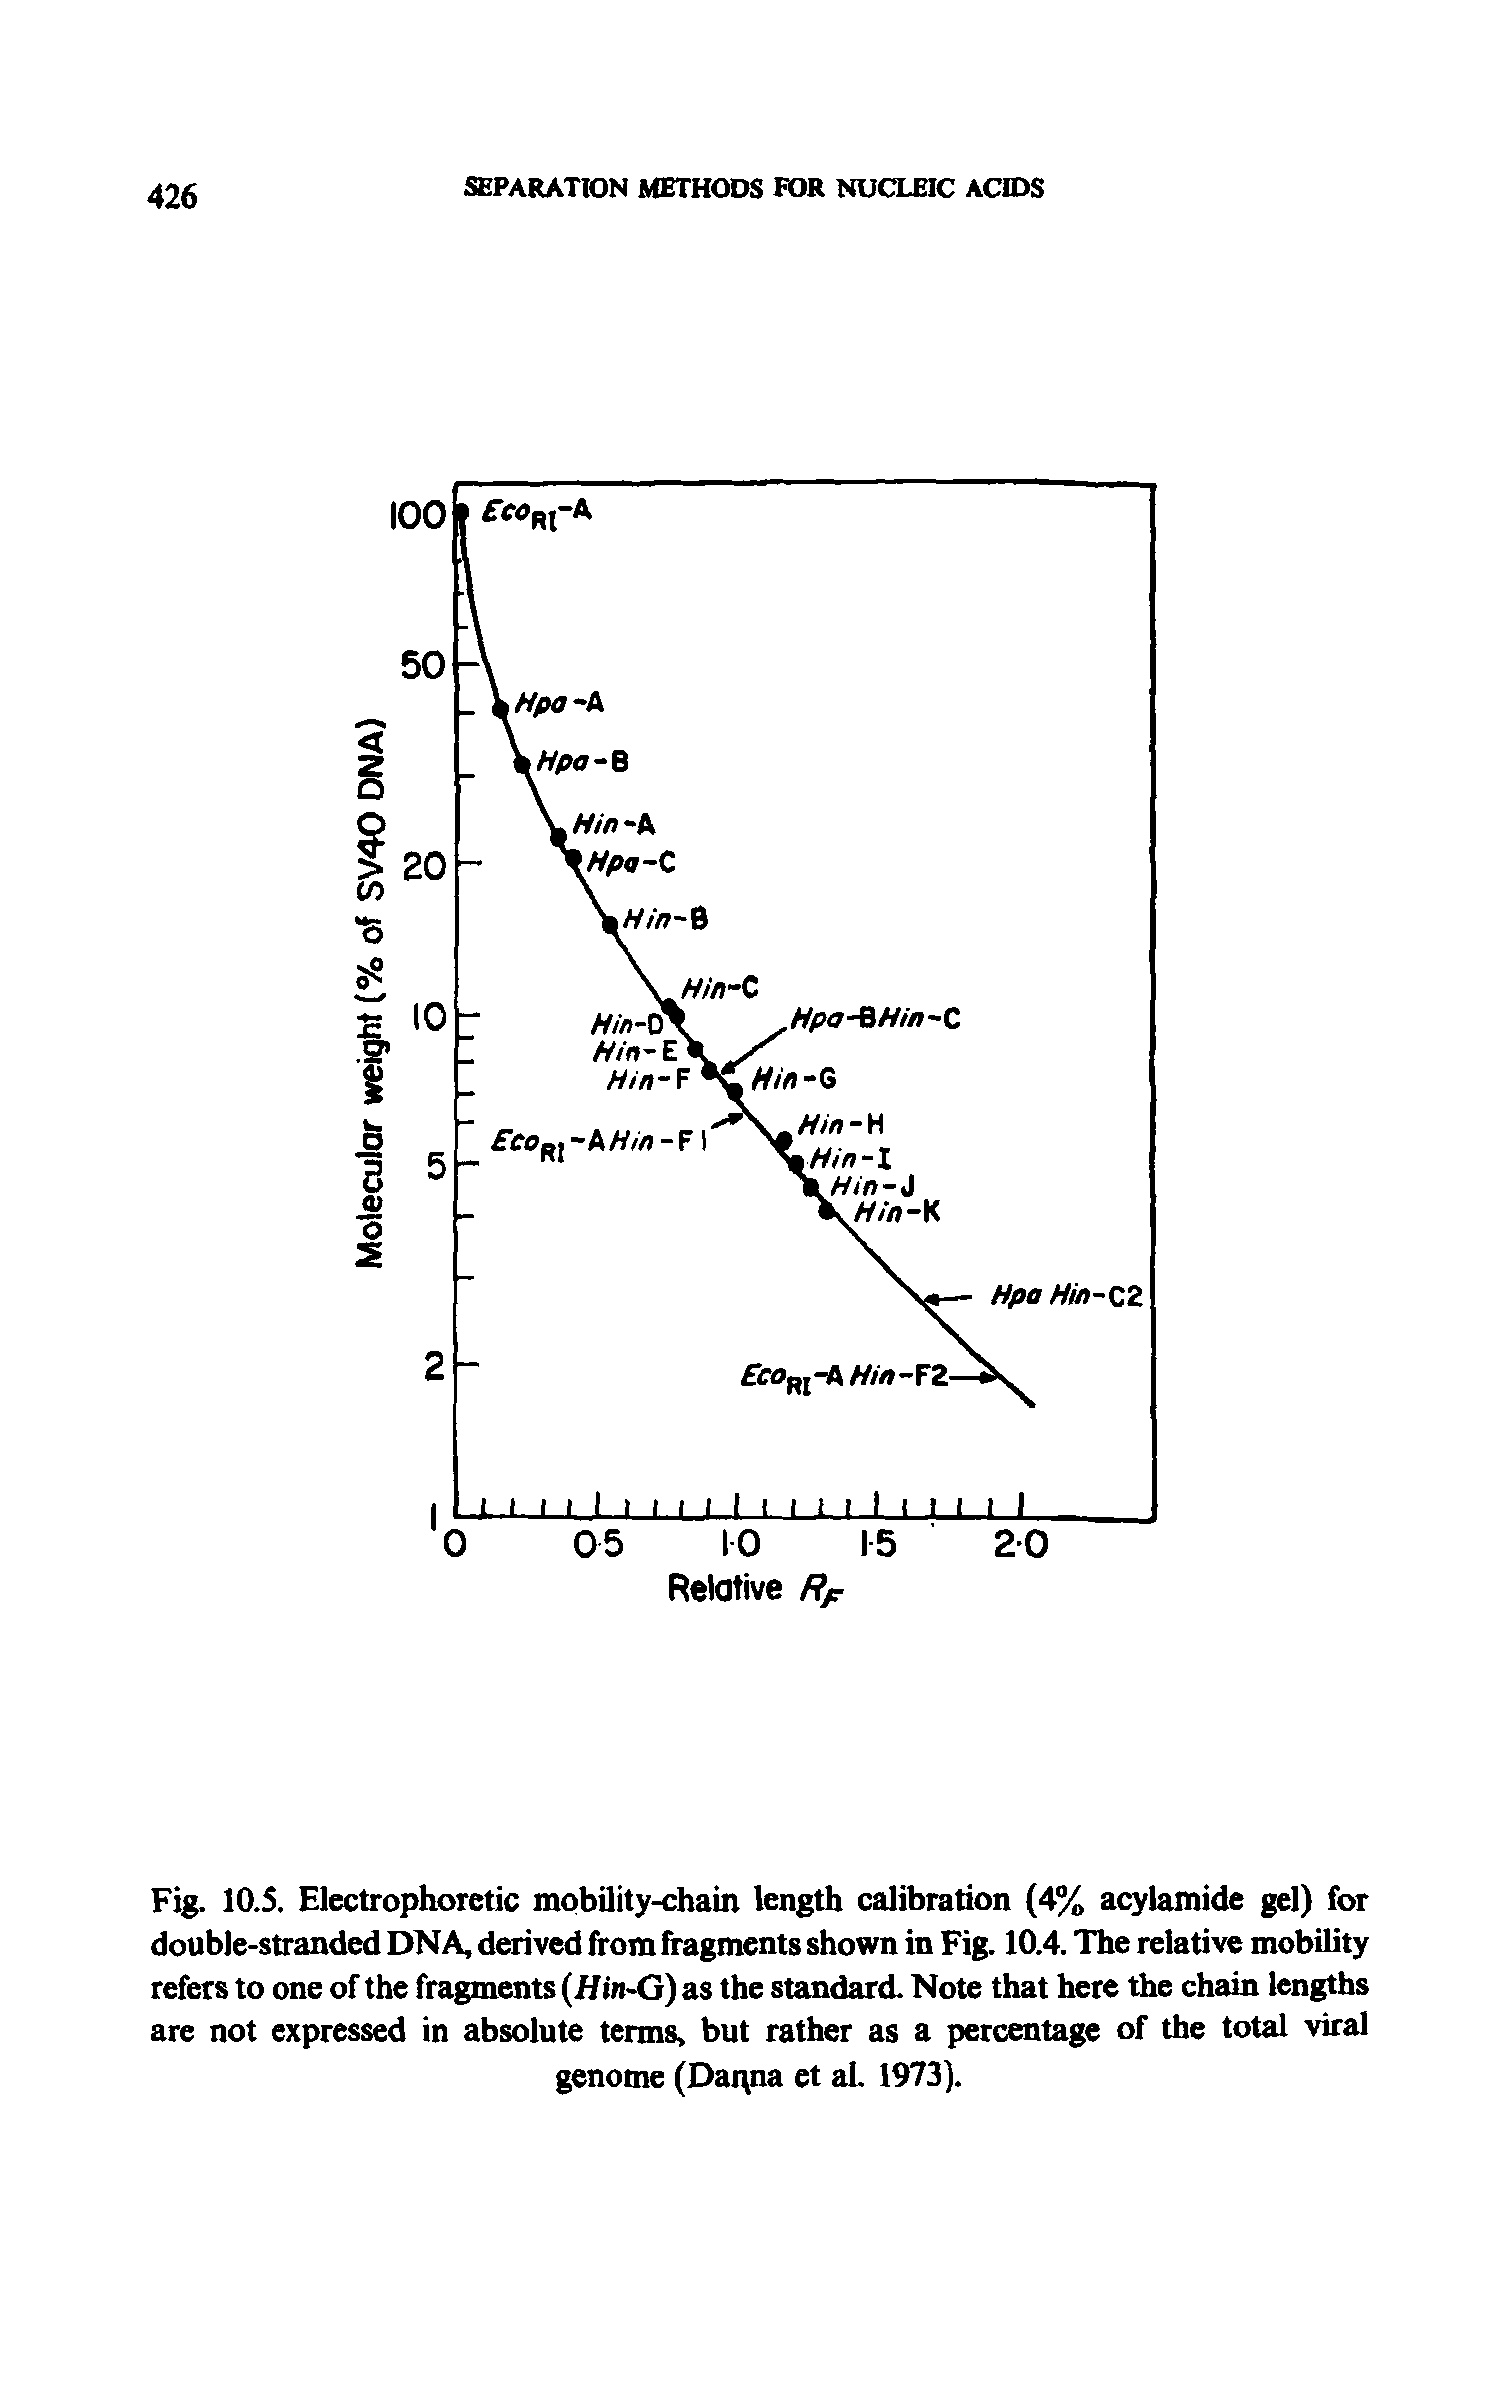 Fig. 10.5. Electrophoretic mobility-chain length calibration (4% acylamide gel) for double-stranded DNA, derived from fragments shown in Fig. 10.4. The relative mobility refers to one of the fragments (if in-G) as the standard. Note that here the chain lengths are not expressed in absolute terms, but rather as a percentage of the total viral genome (Dat na et aL 1973).